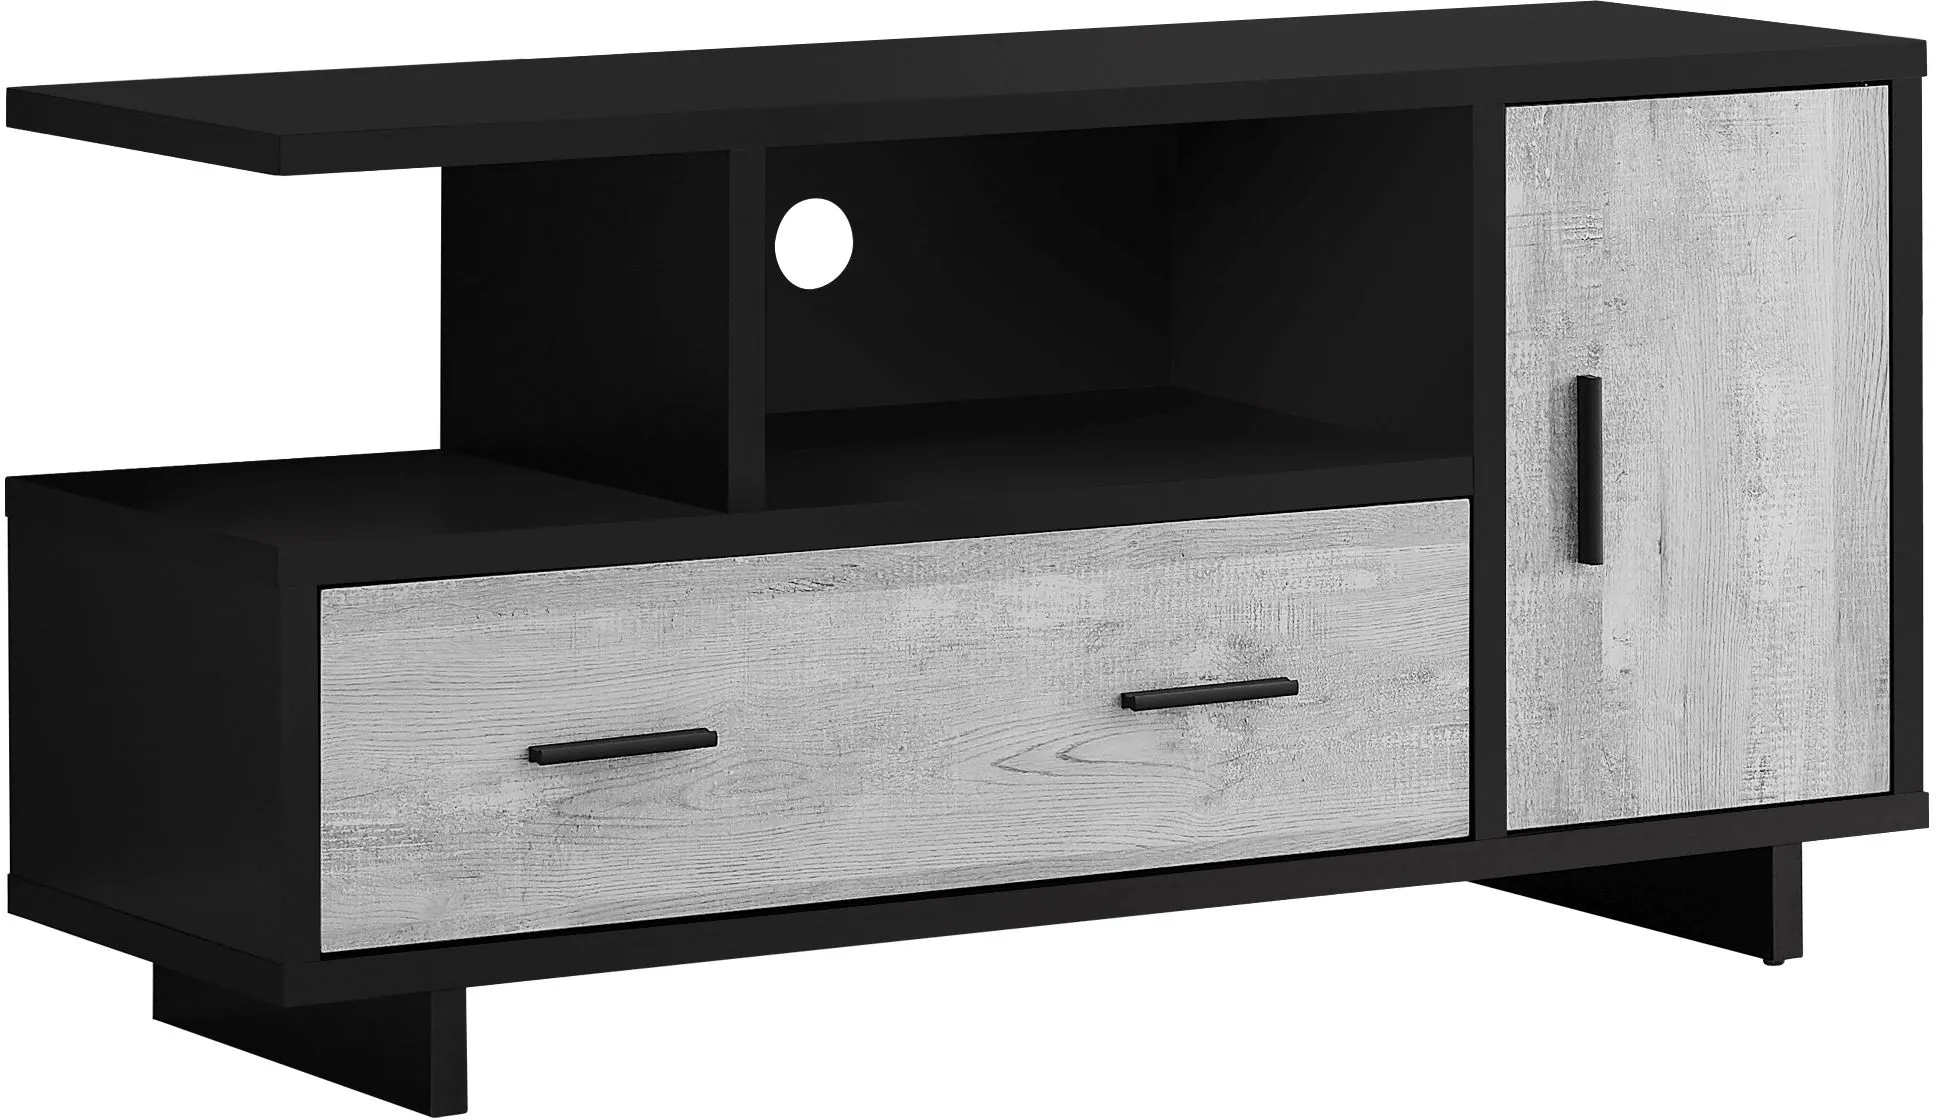 Tv Stand, 48 Inch, Console, Media Entertainment Center, Storage Cabinet, Drawers, Living Room, Bedroom, Laminate, Black, Grey, Contemporary, Modern